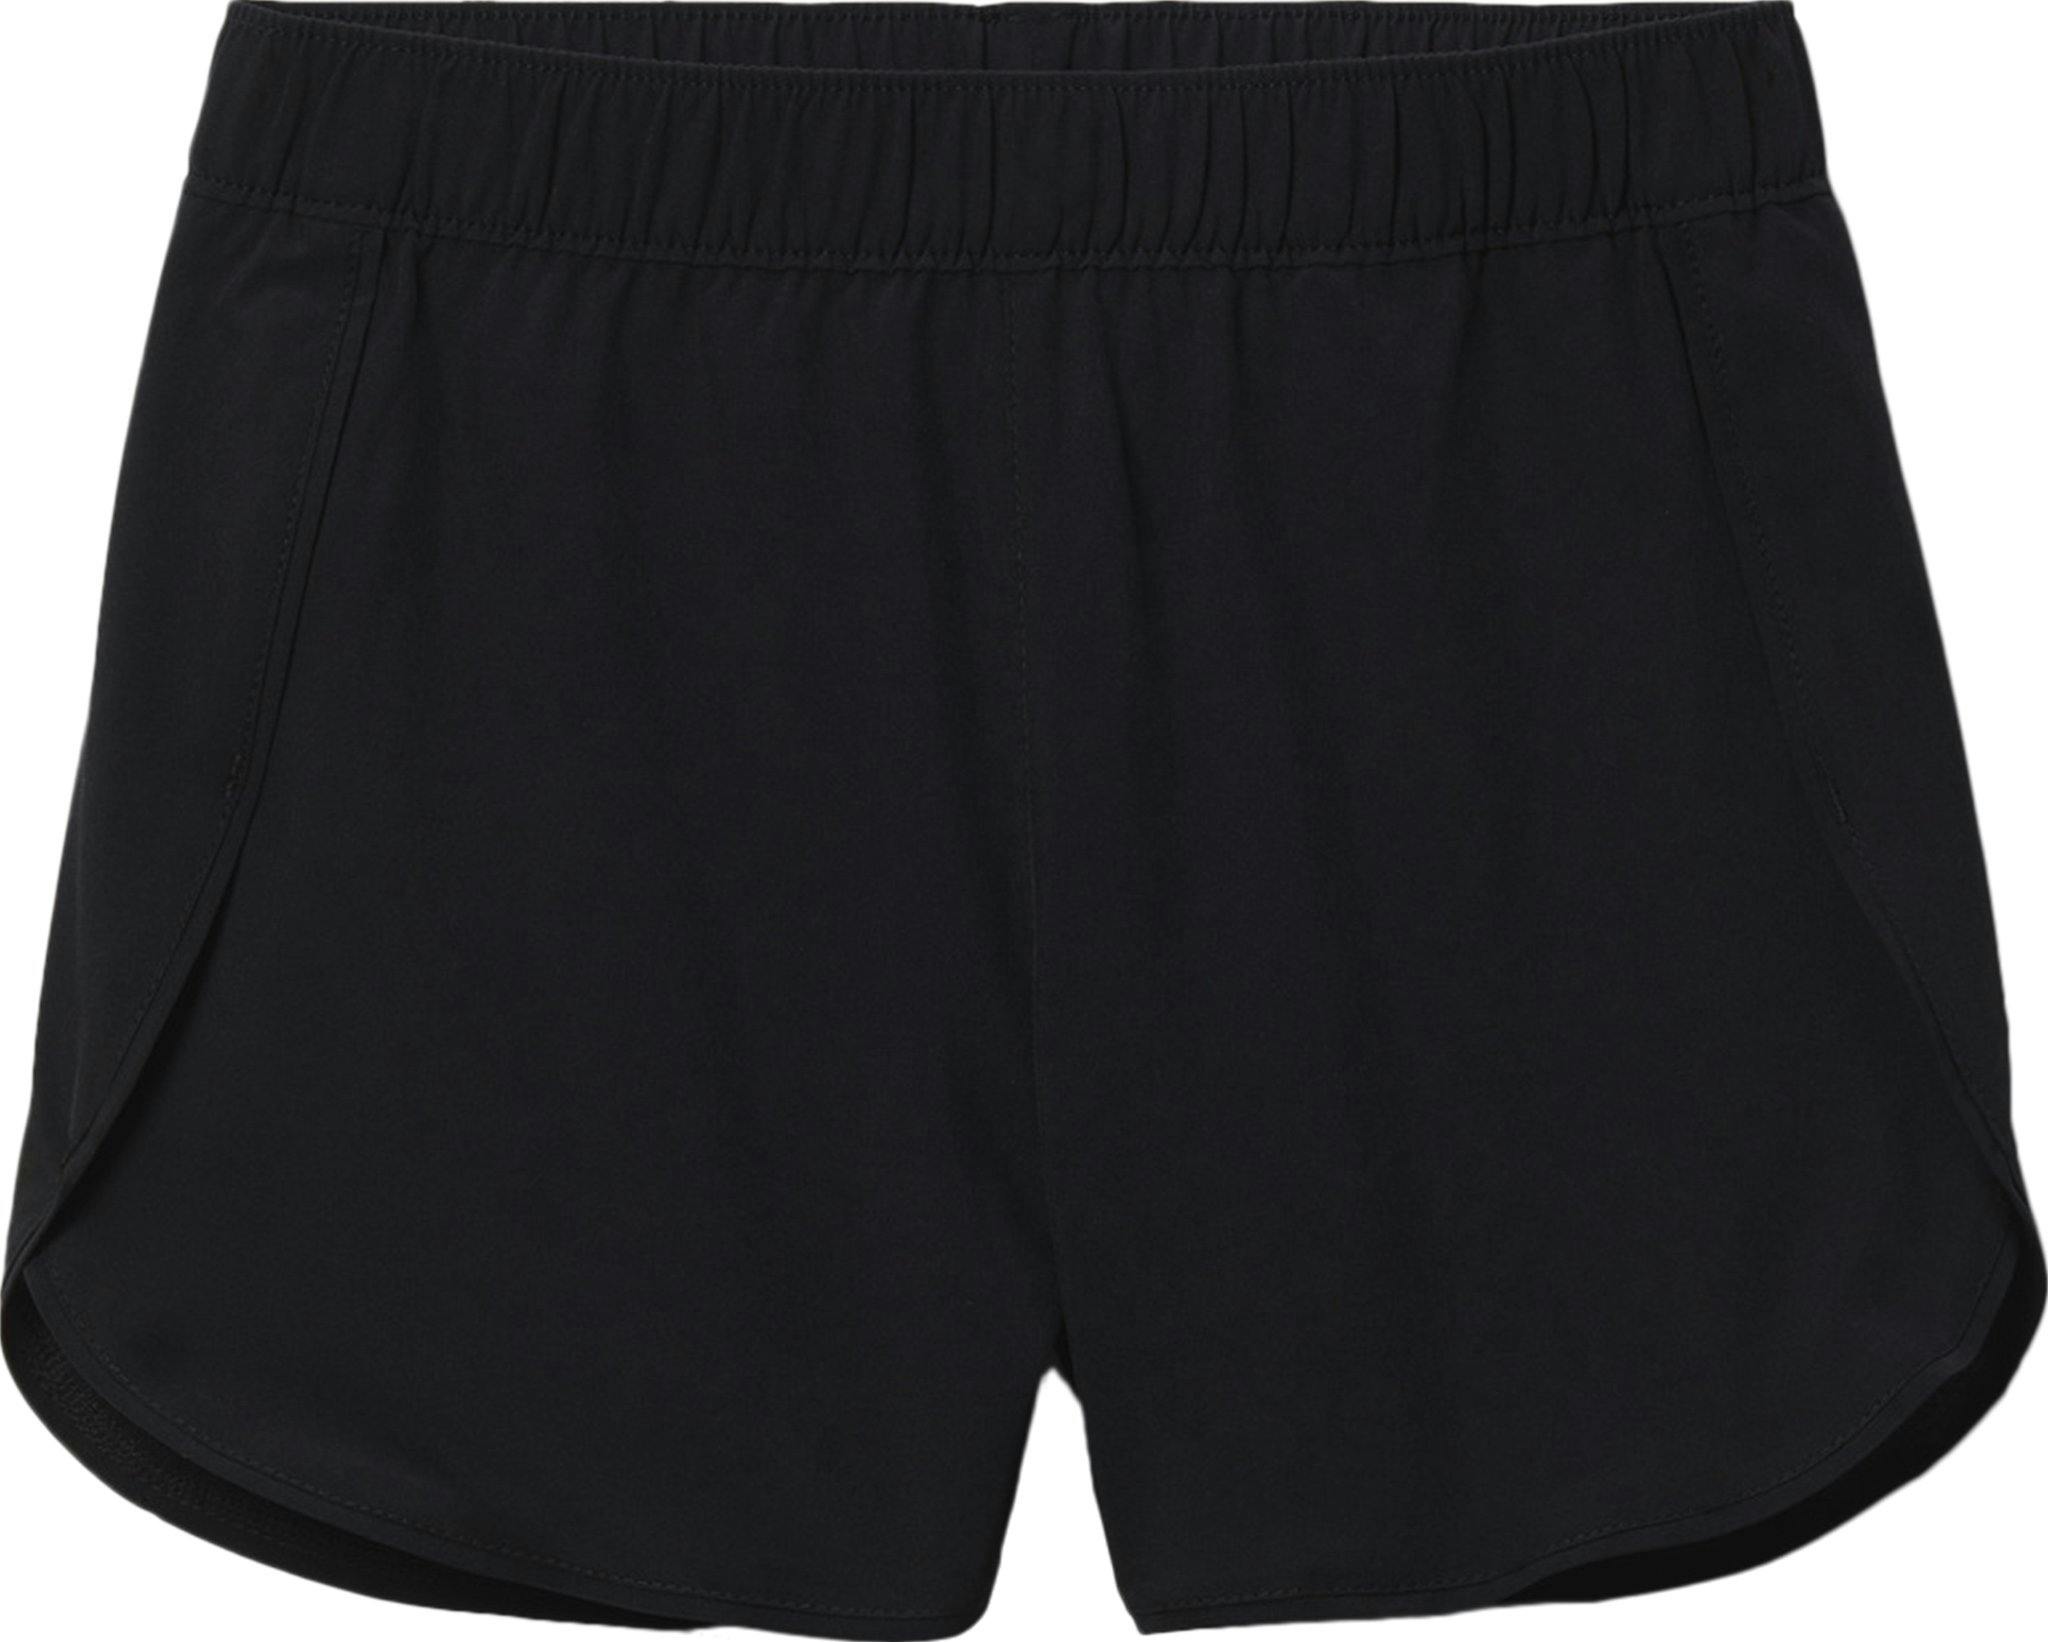 Product image for Columbia Hike Short - Girls